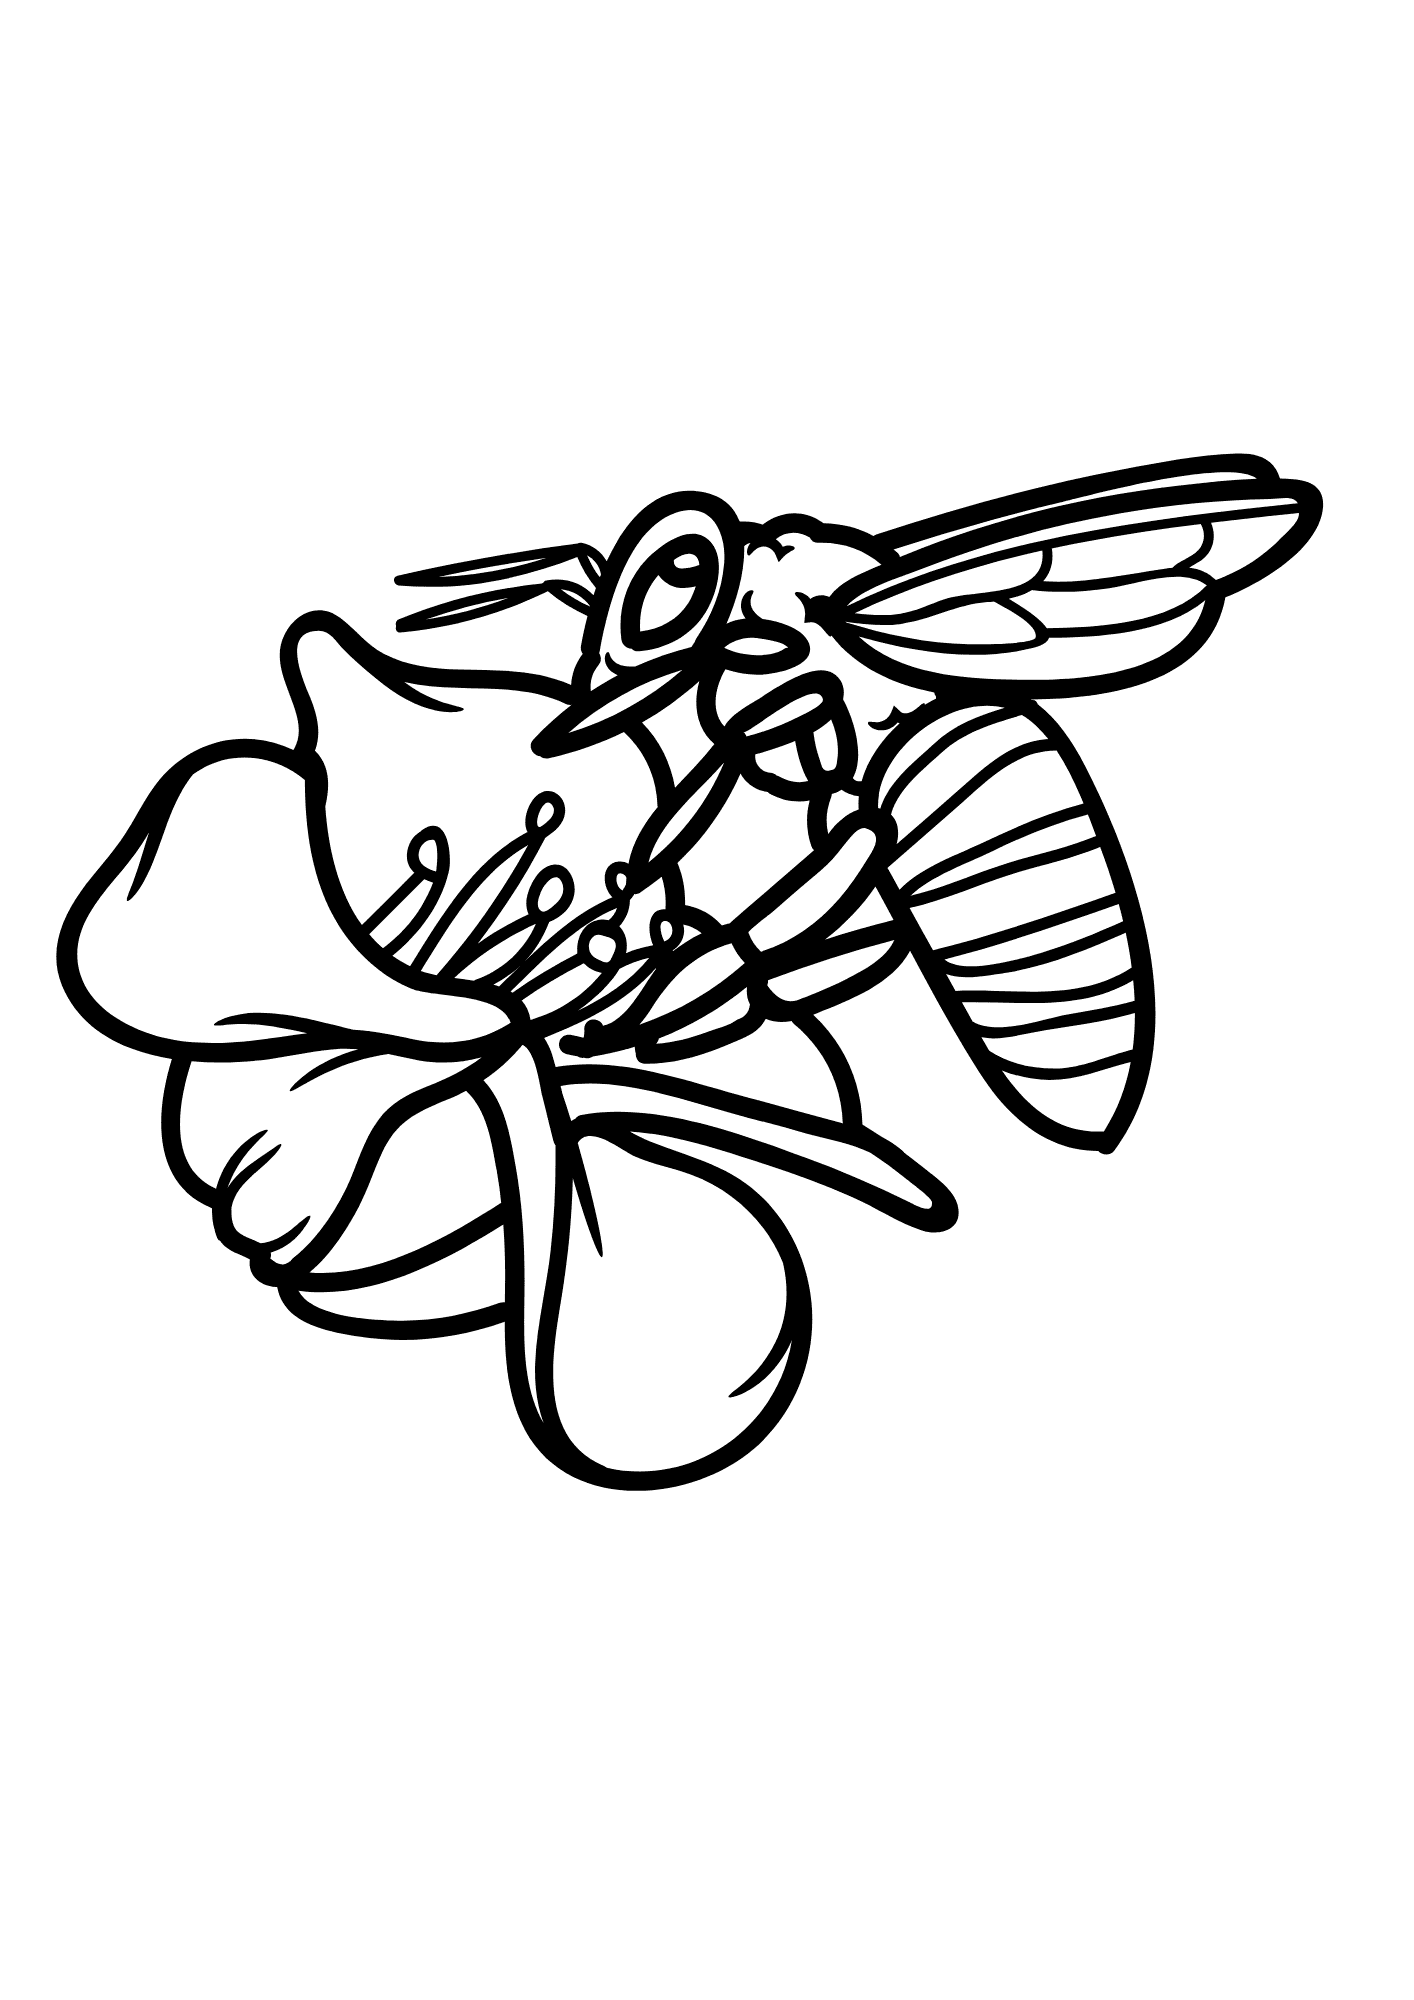 Bee Art Coloring Page